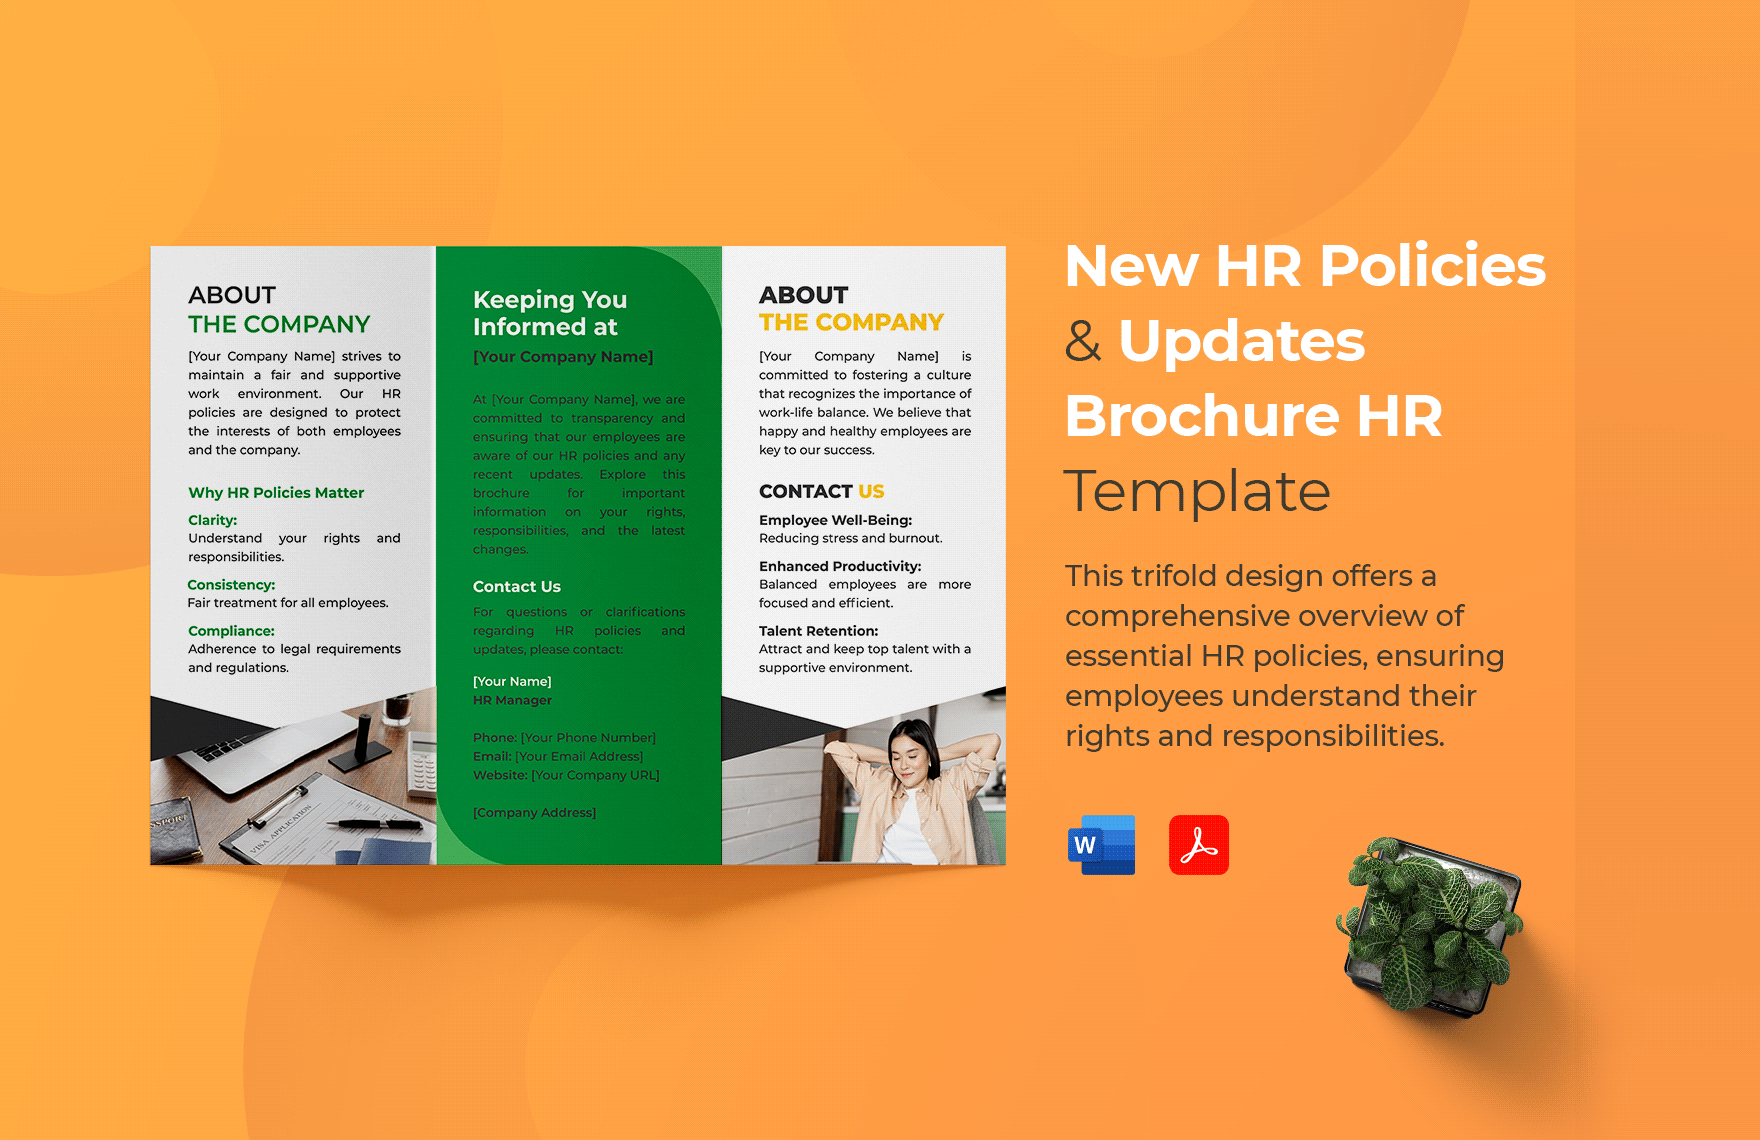 New HR Policies And Updates Brochure HR Template